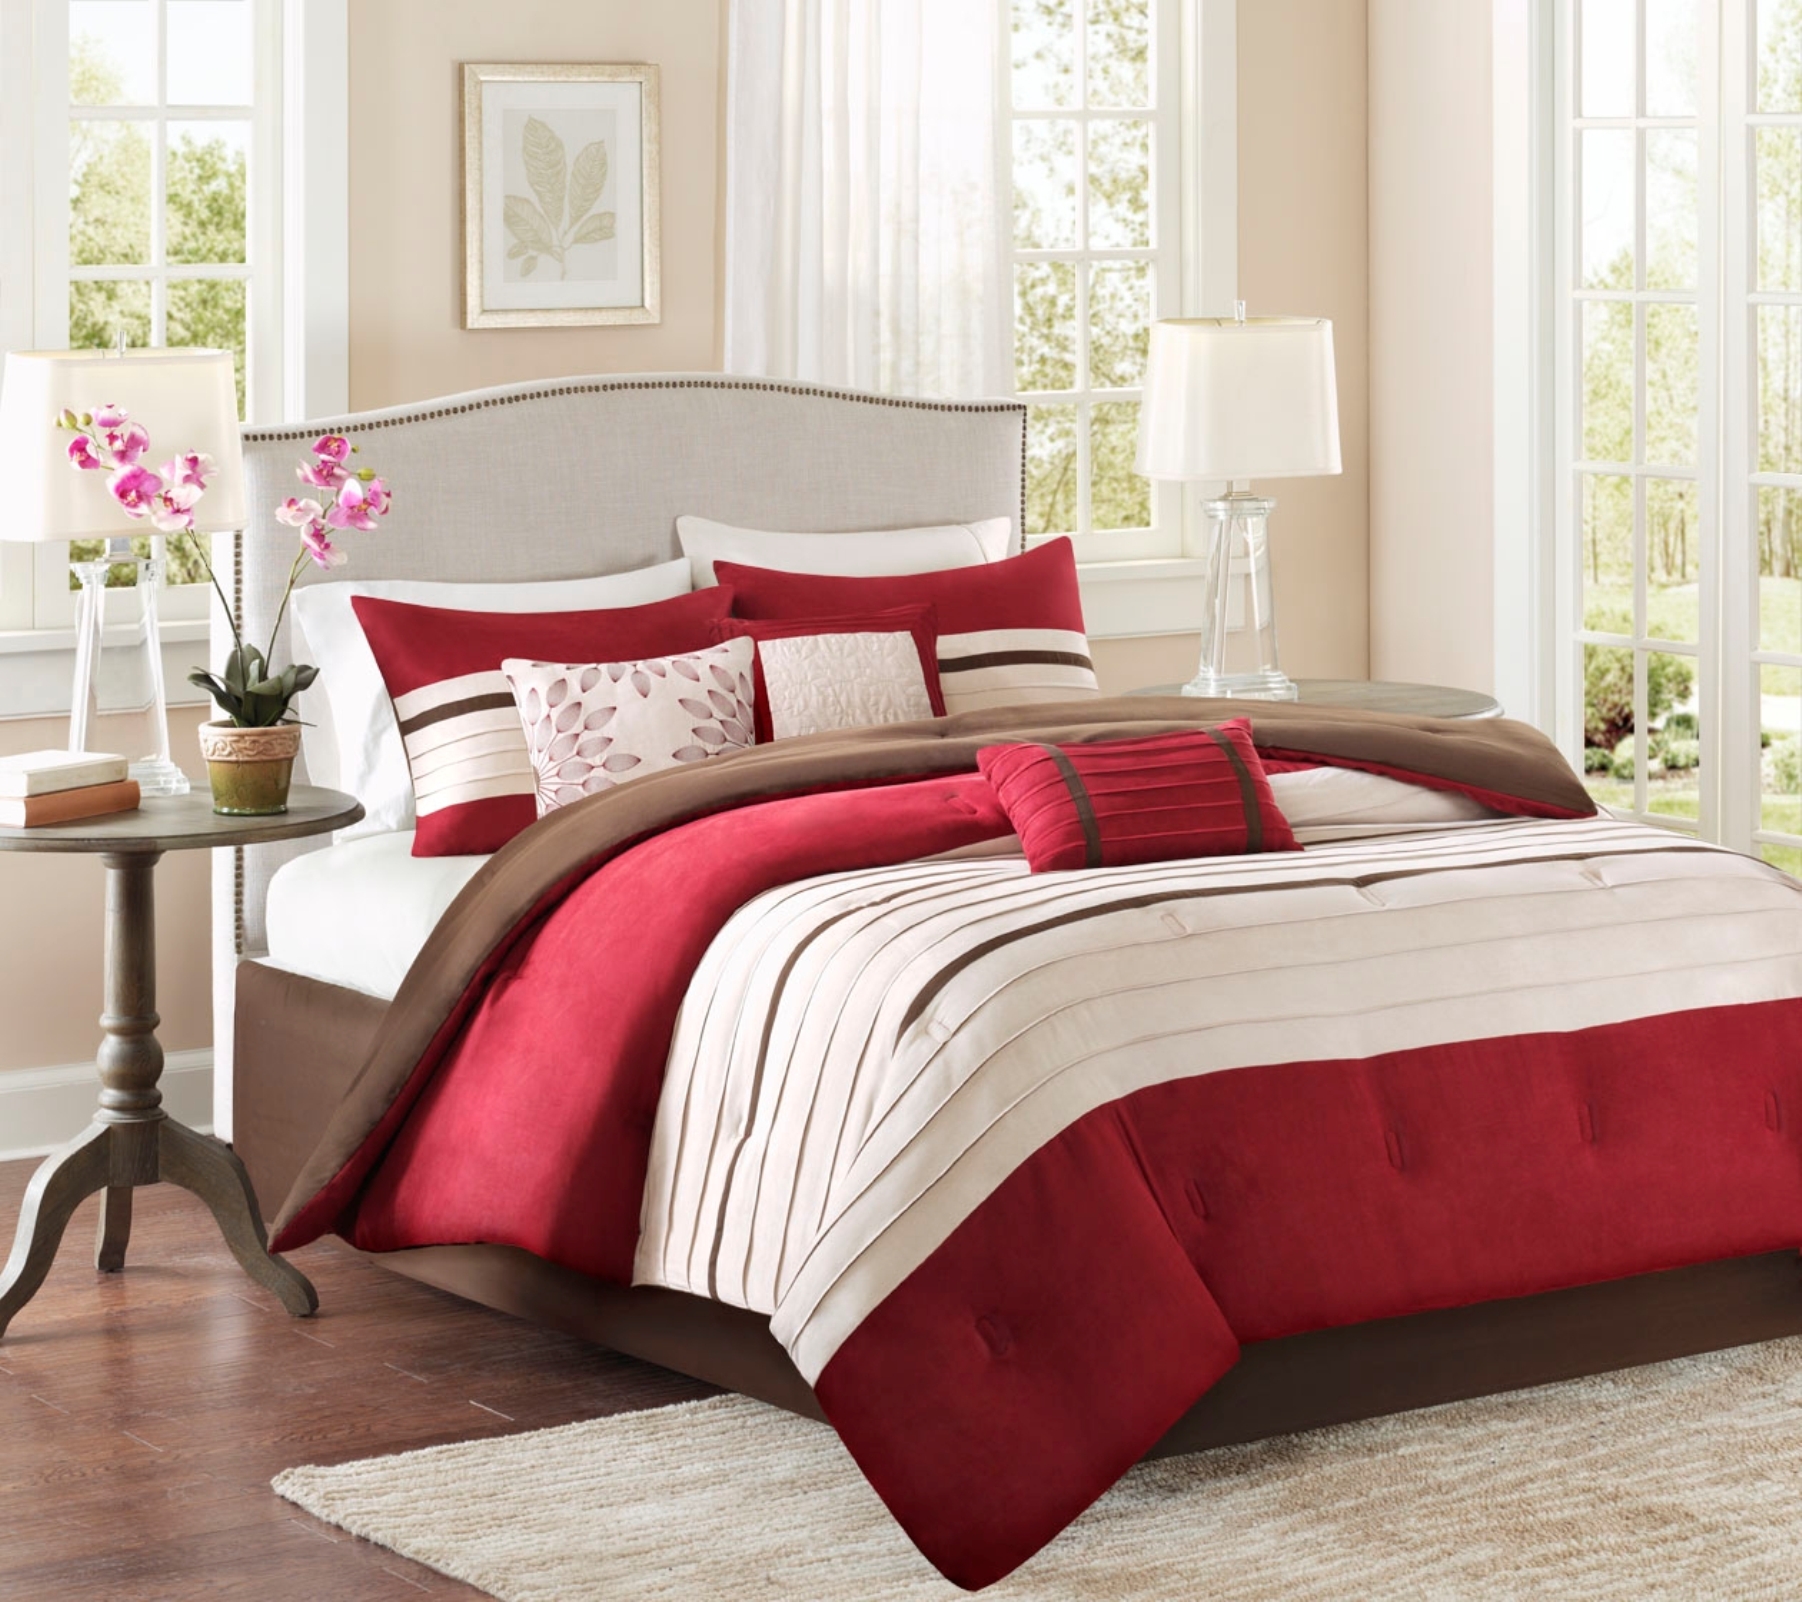 Cannon 7-Piece Palmer Microsuede Comforter Set - Pleated